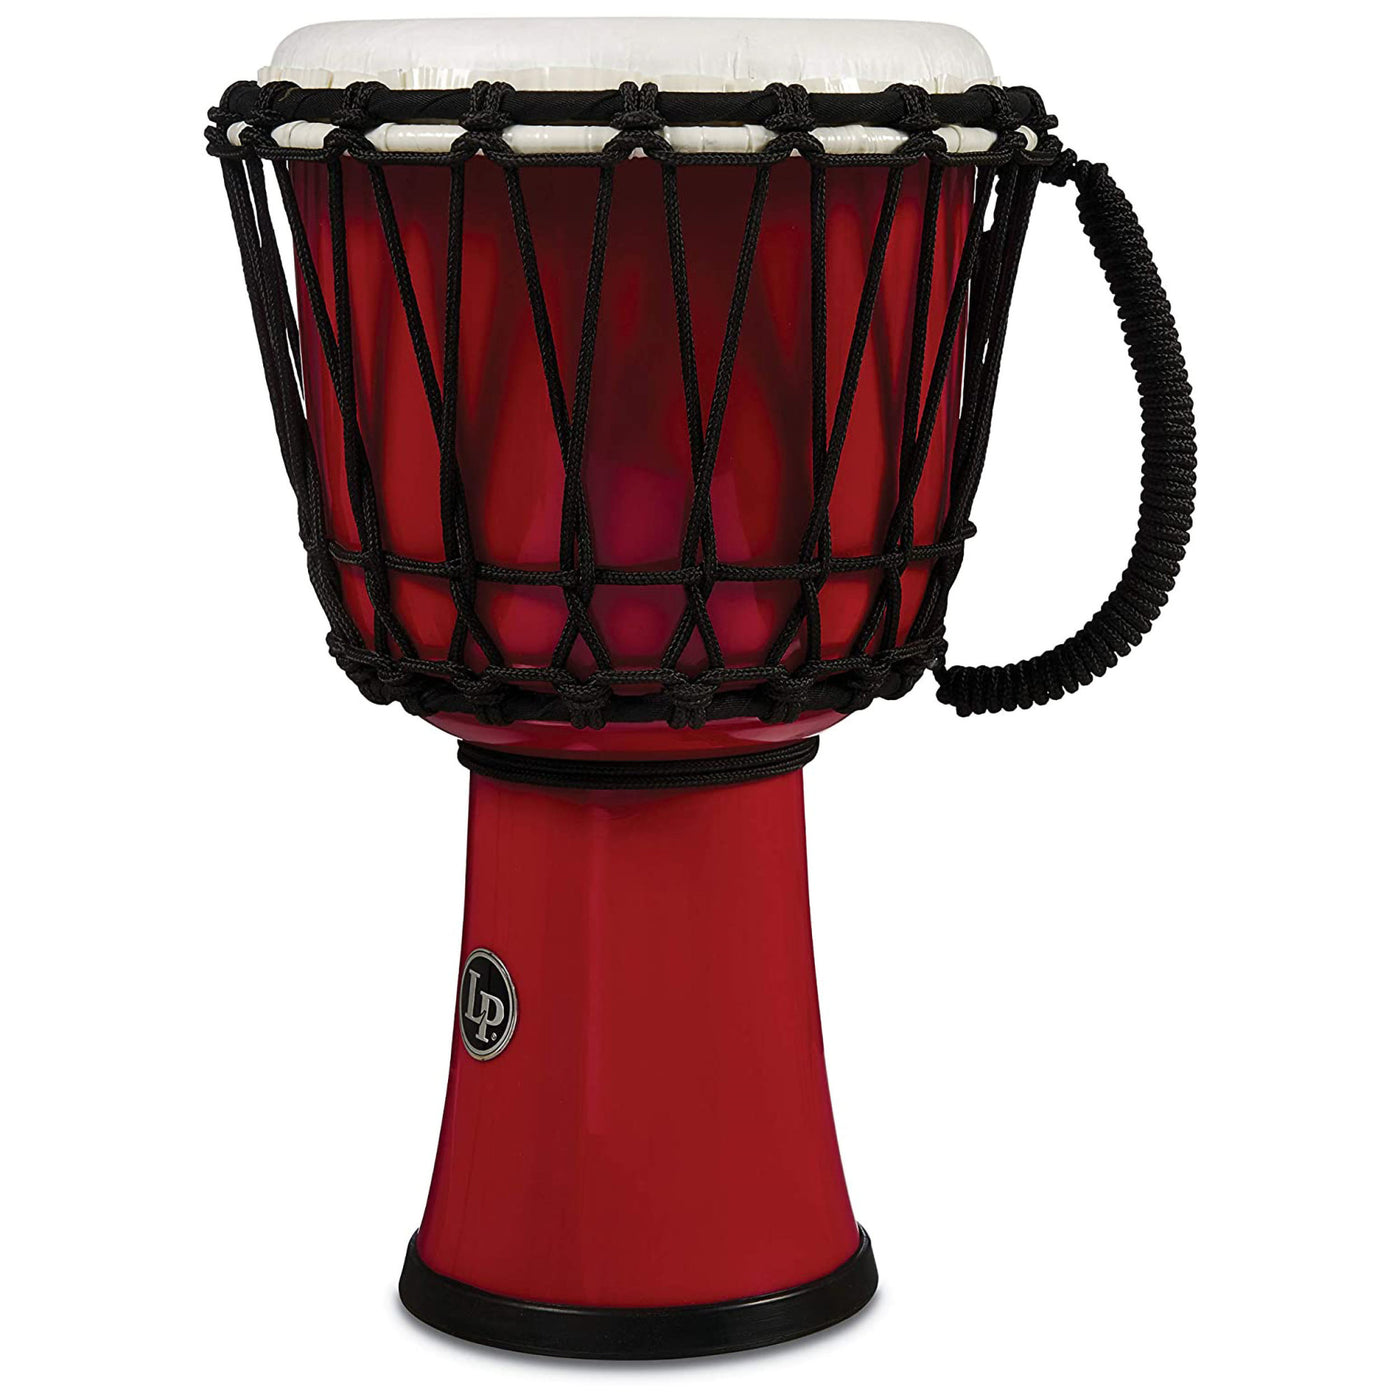 LP World Collection Rope Circle Djembe, 7", Red